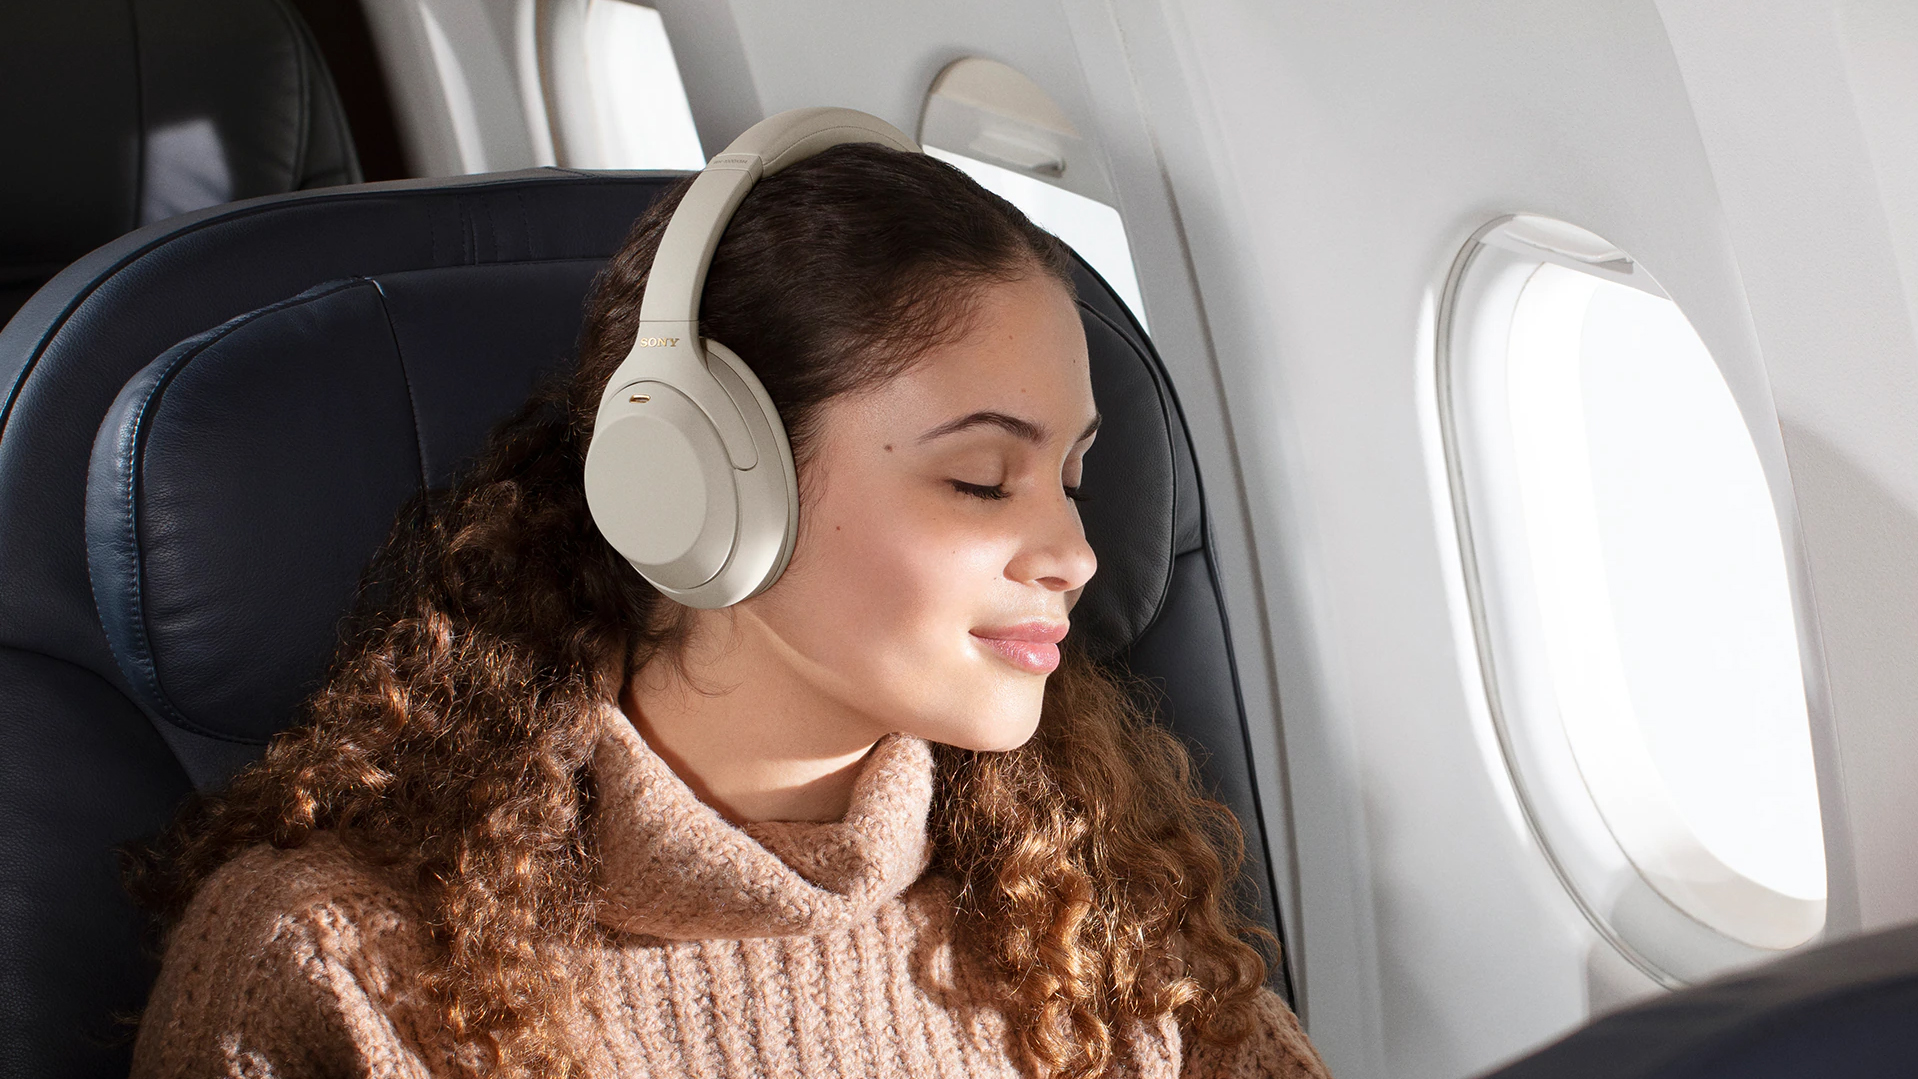 Sony WH-1000XM4 used by a woman on a plane